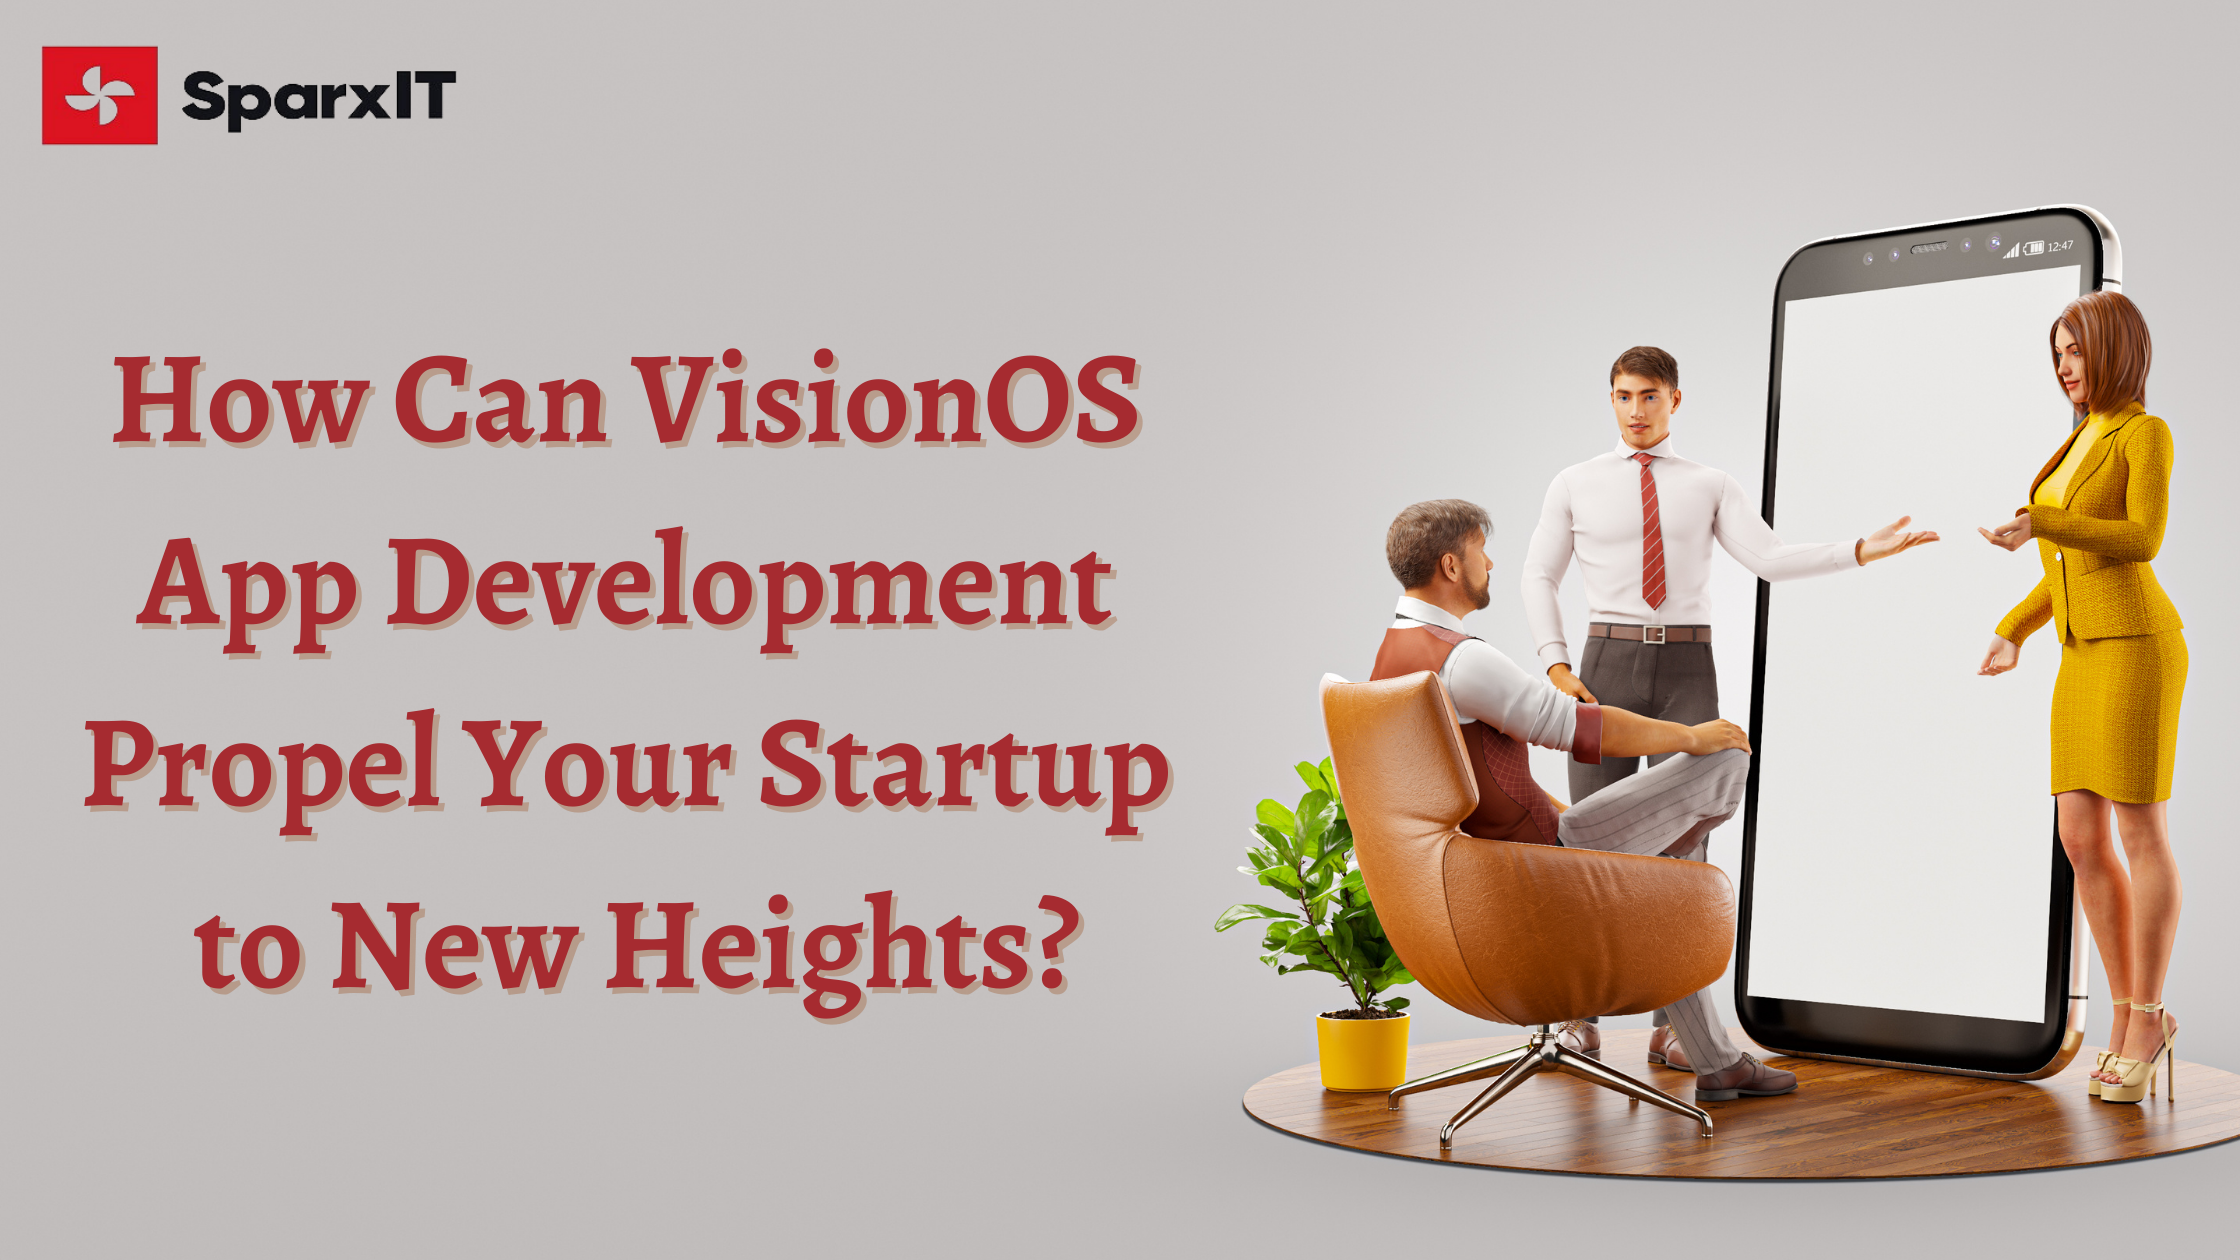 How Can VisionOS App Development Propel Your Startup to New Heights?